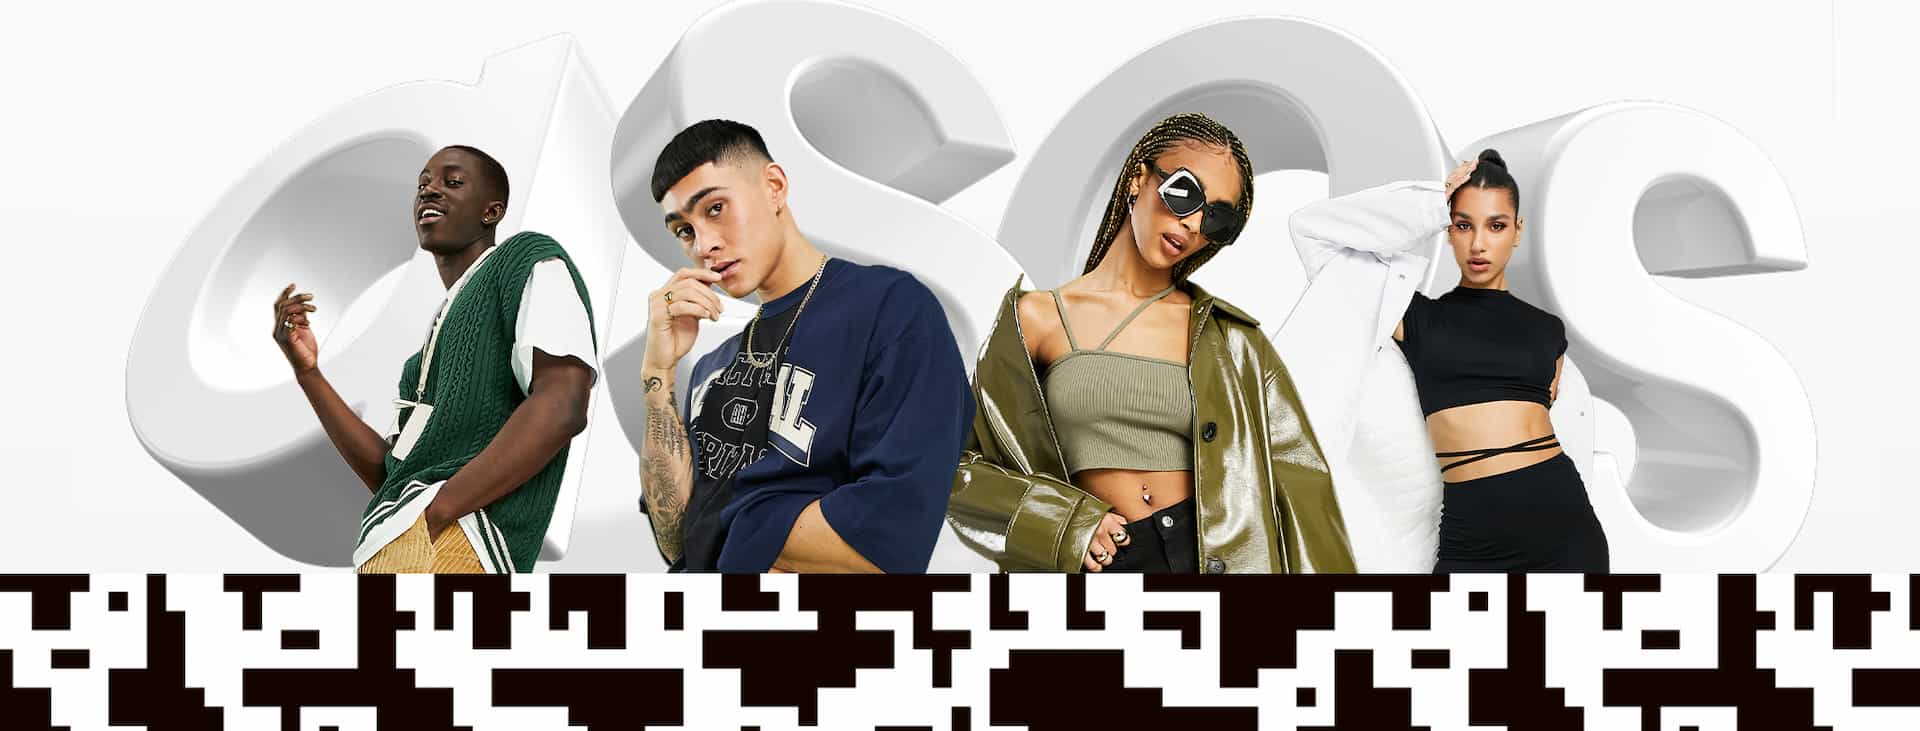 30% OFF on coats, hoodies & more with this ASOS discount code